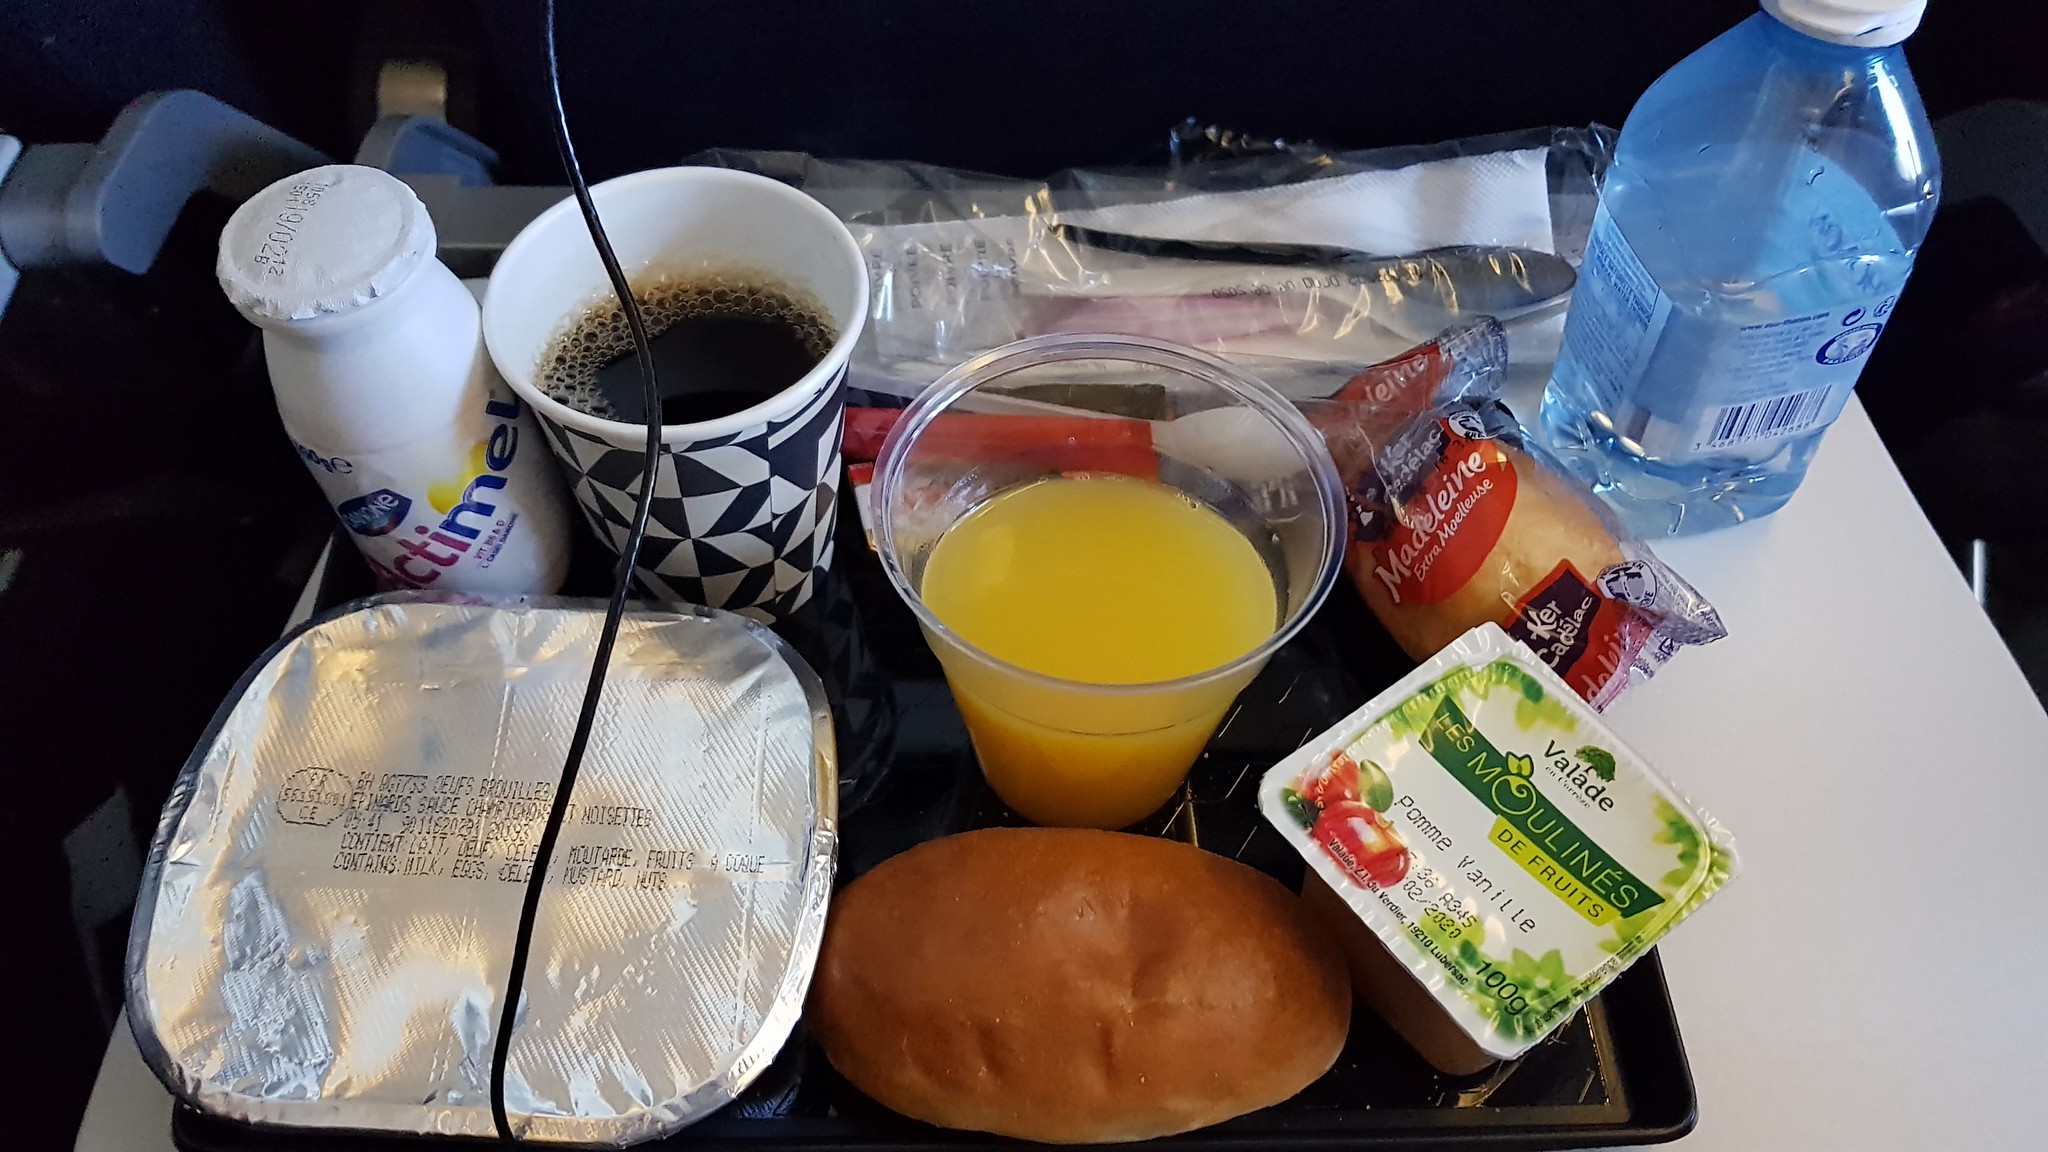 https://skift.com/wp-content/uploads/2019/05/Airplane-food-with-lots-of-plastic.jpg